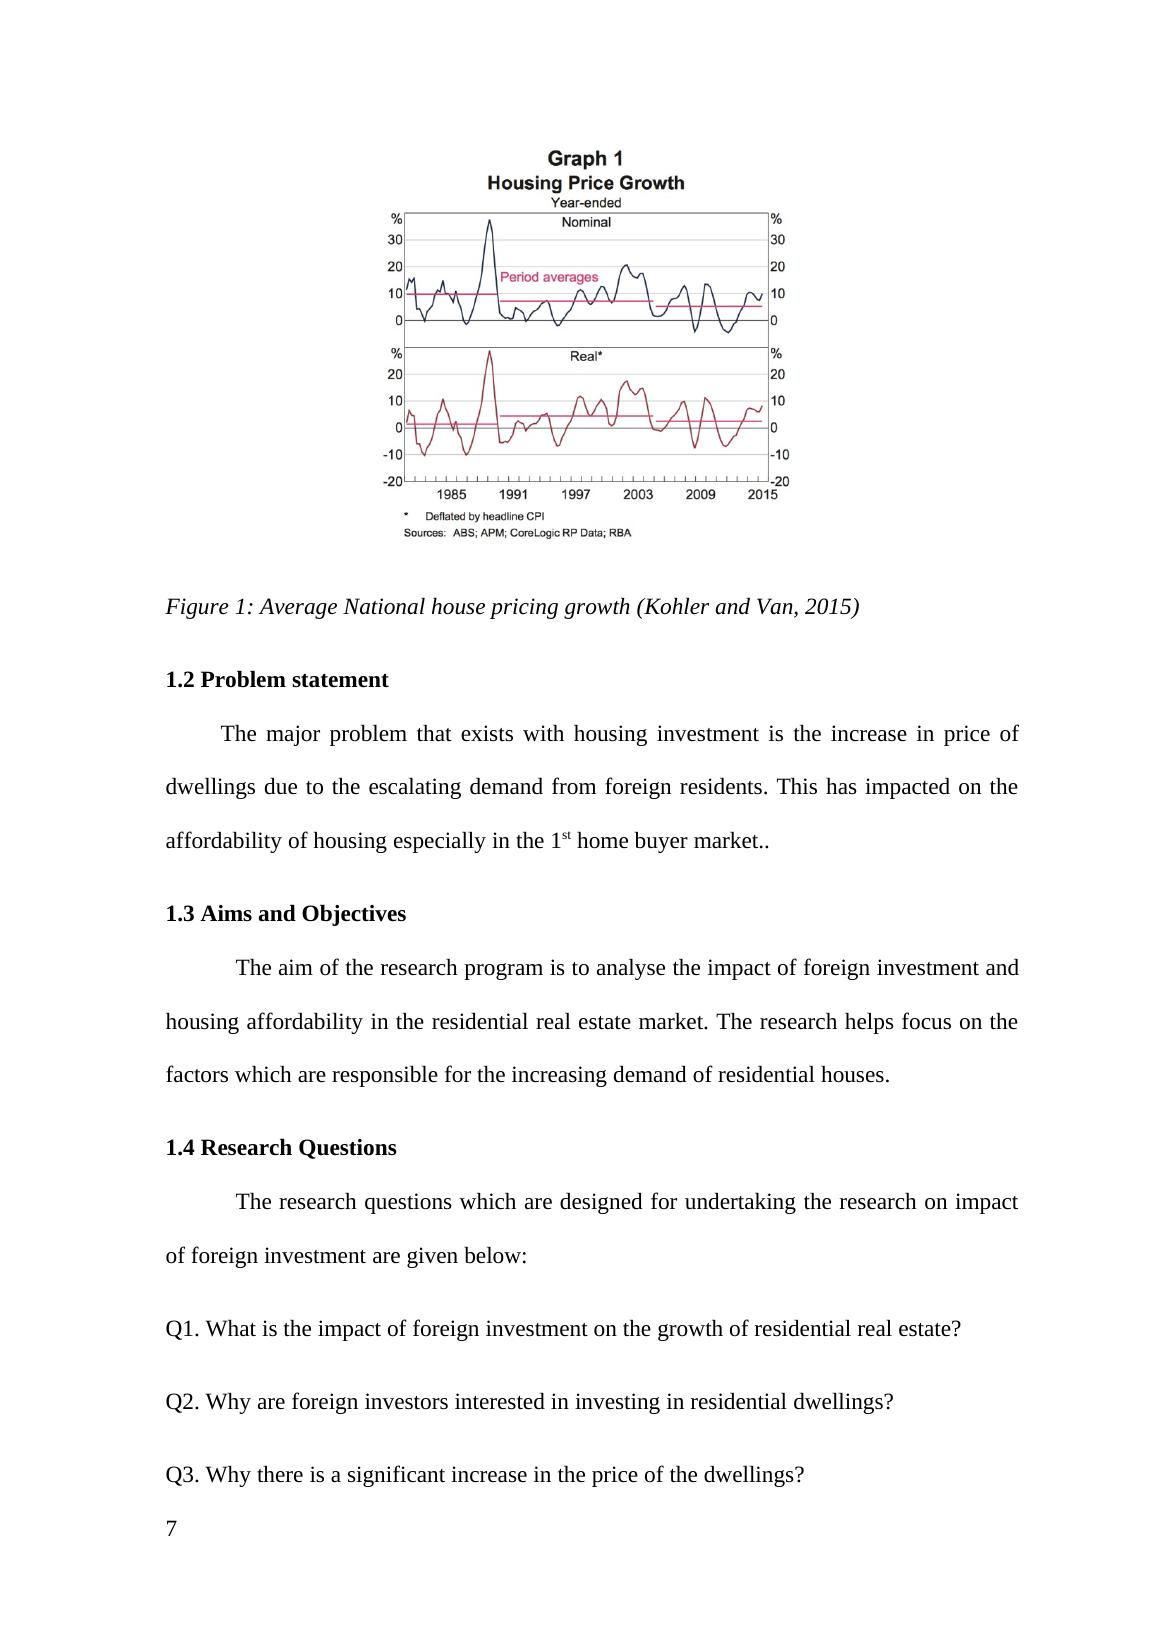 Evaluating the Impact of Foreign Investment - PDF_8